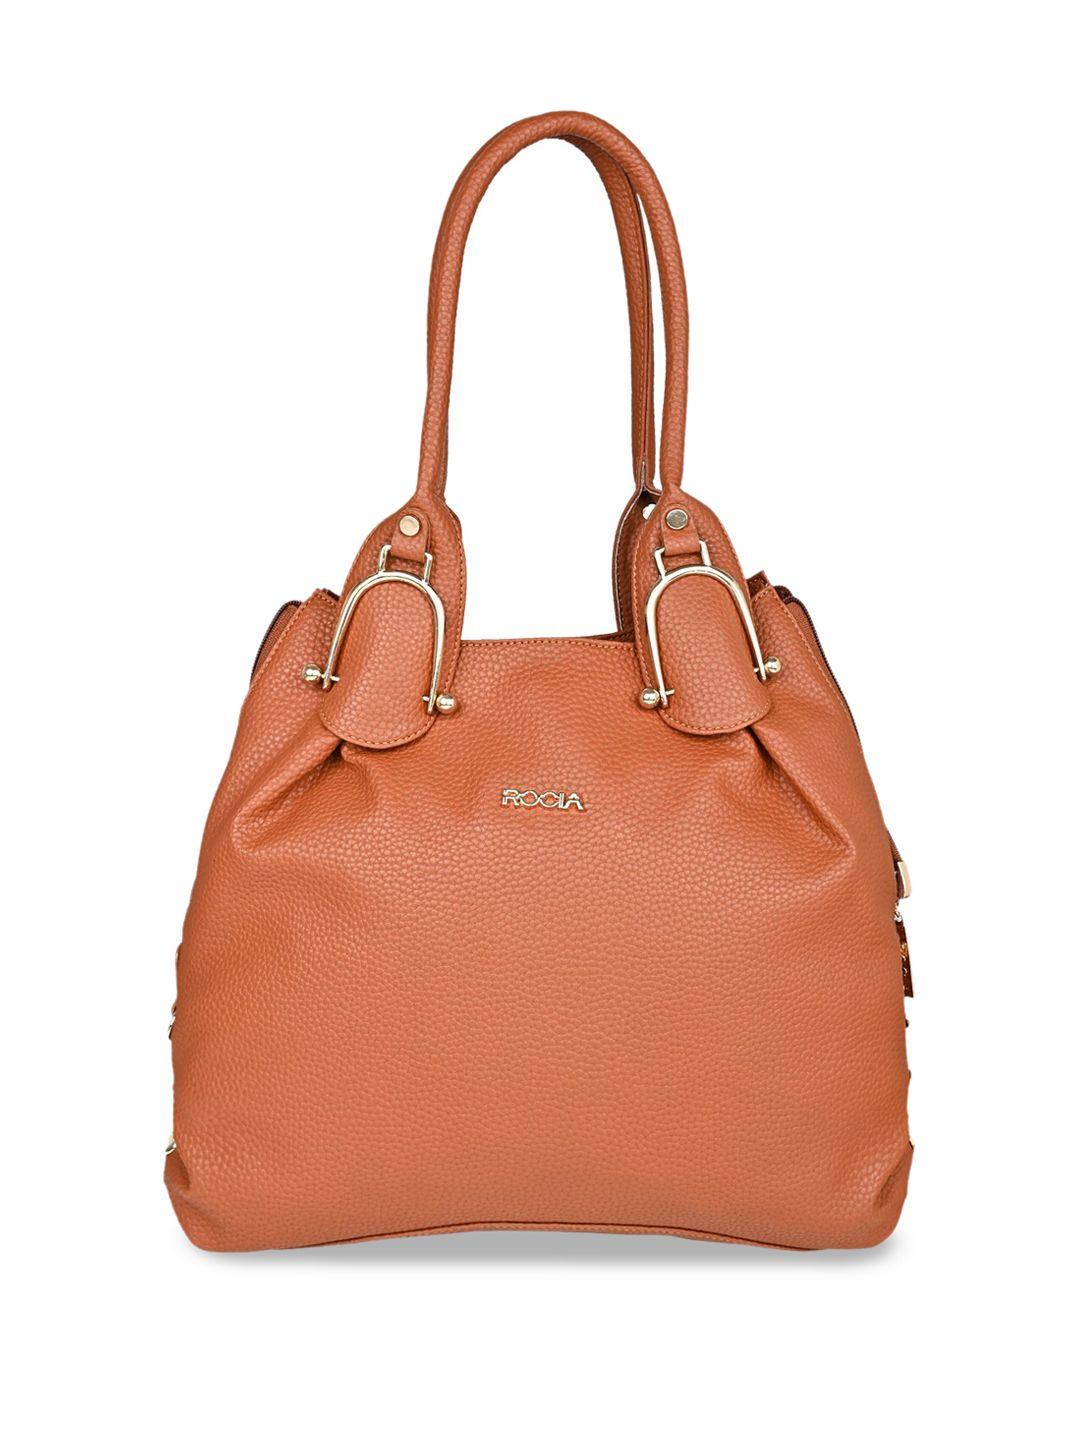 rocia pu structured handheld bag with buckle detail